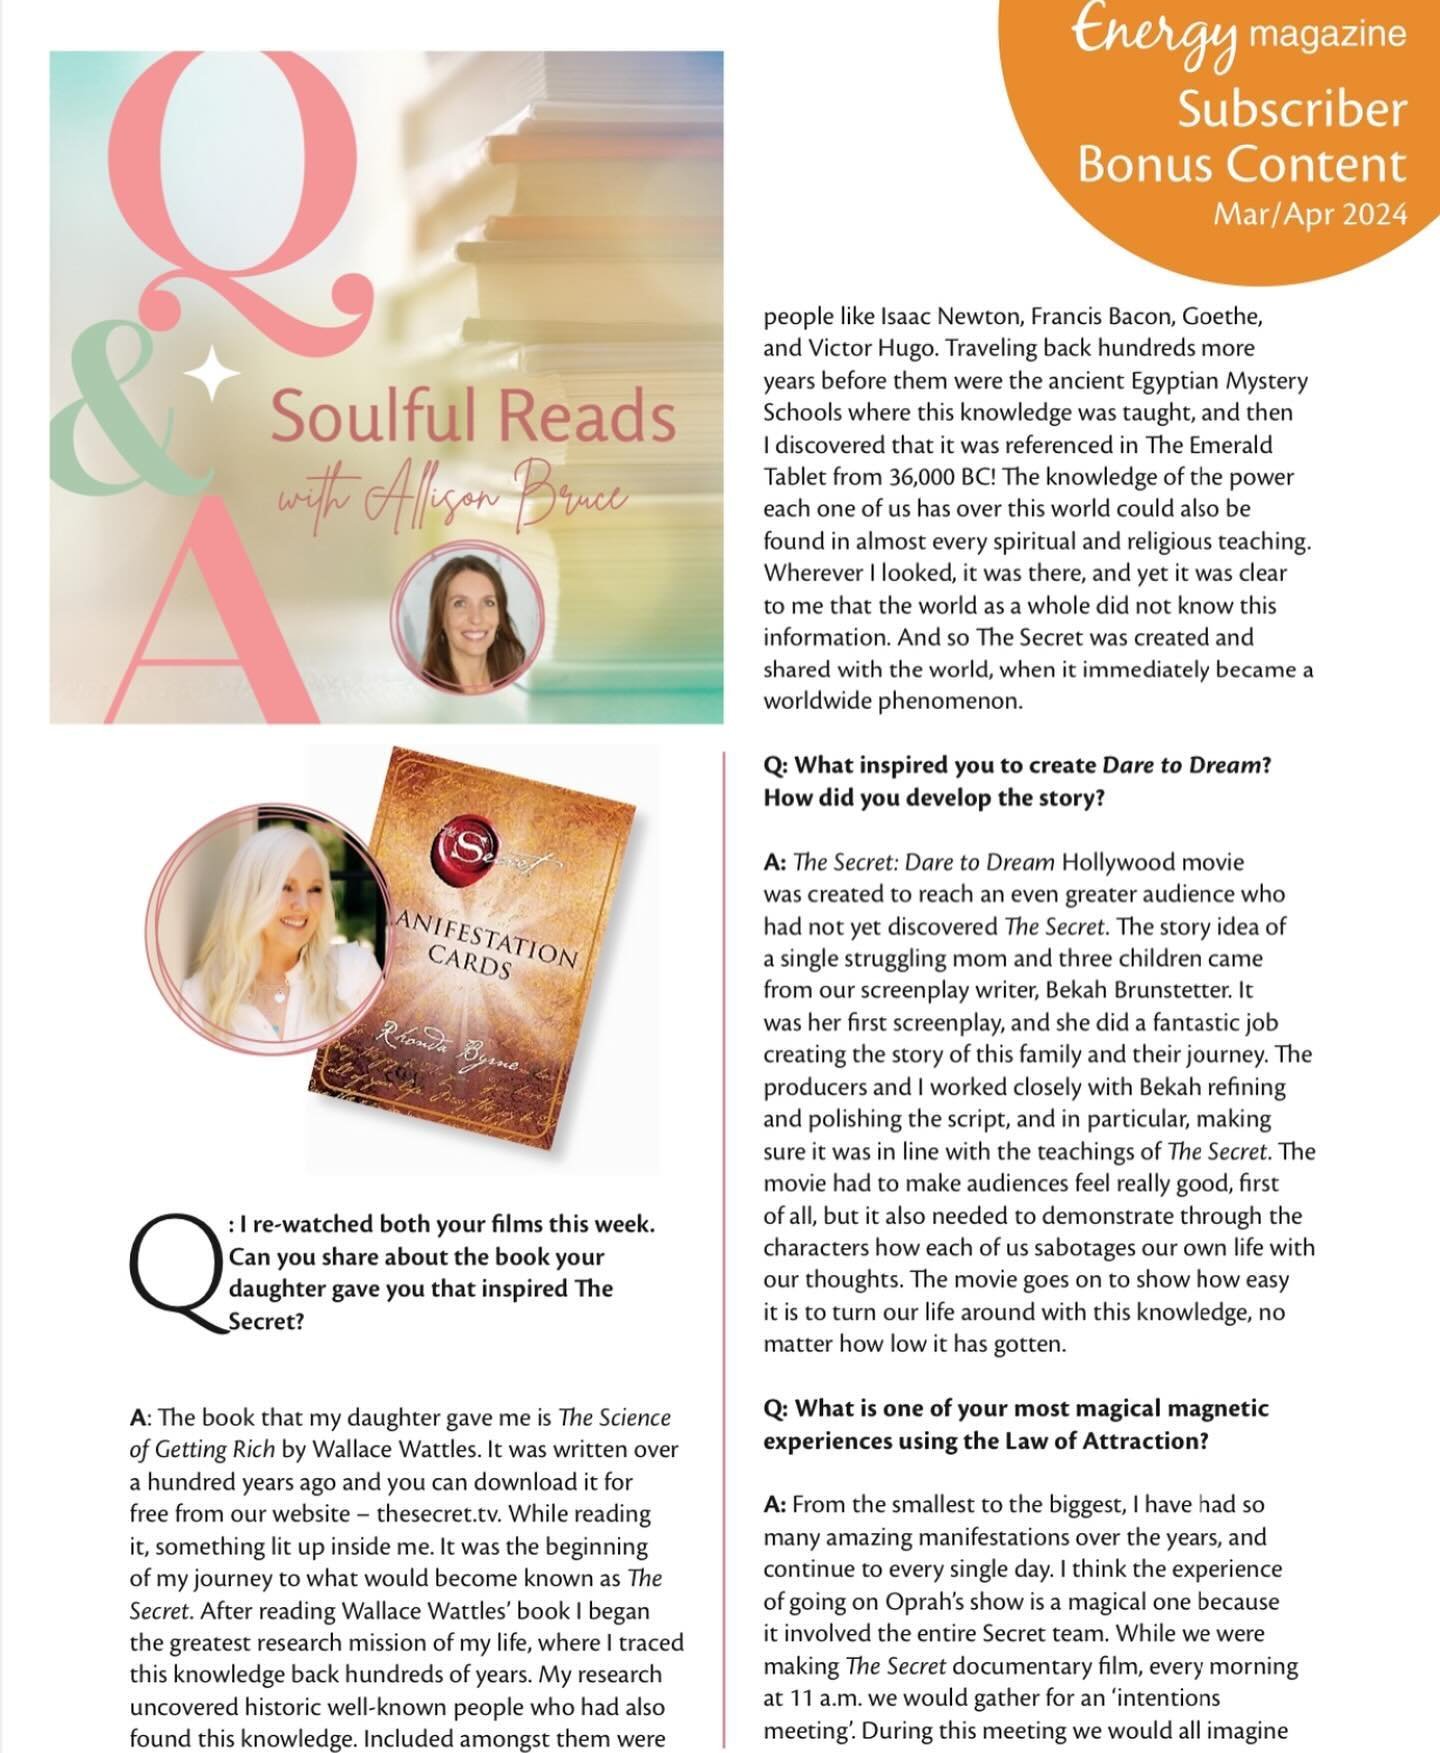 My most recent Soulful Reads Q&amp;A is with Rhonda Byrne, thanks Rhonda! I asked her questions about The Secret, Dare to Dream, The Law of Attraction, visioning, and maintaining positivity. The Q&amp;A link is below. 

The Secret Manifestation Cards